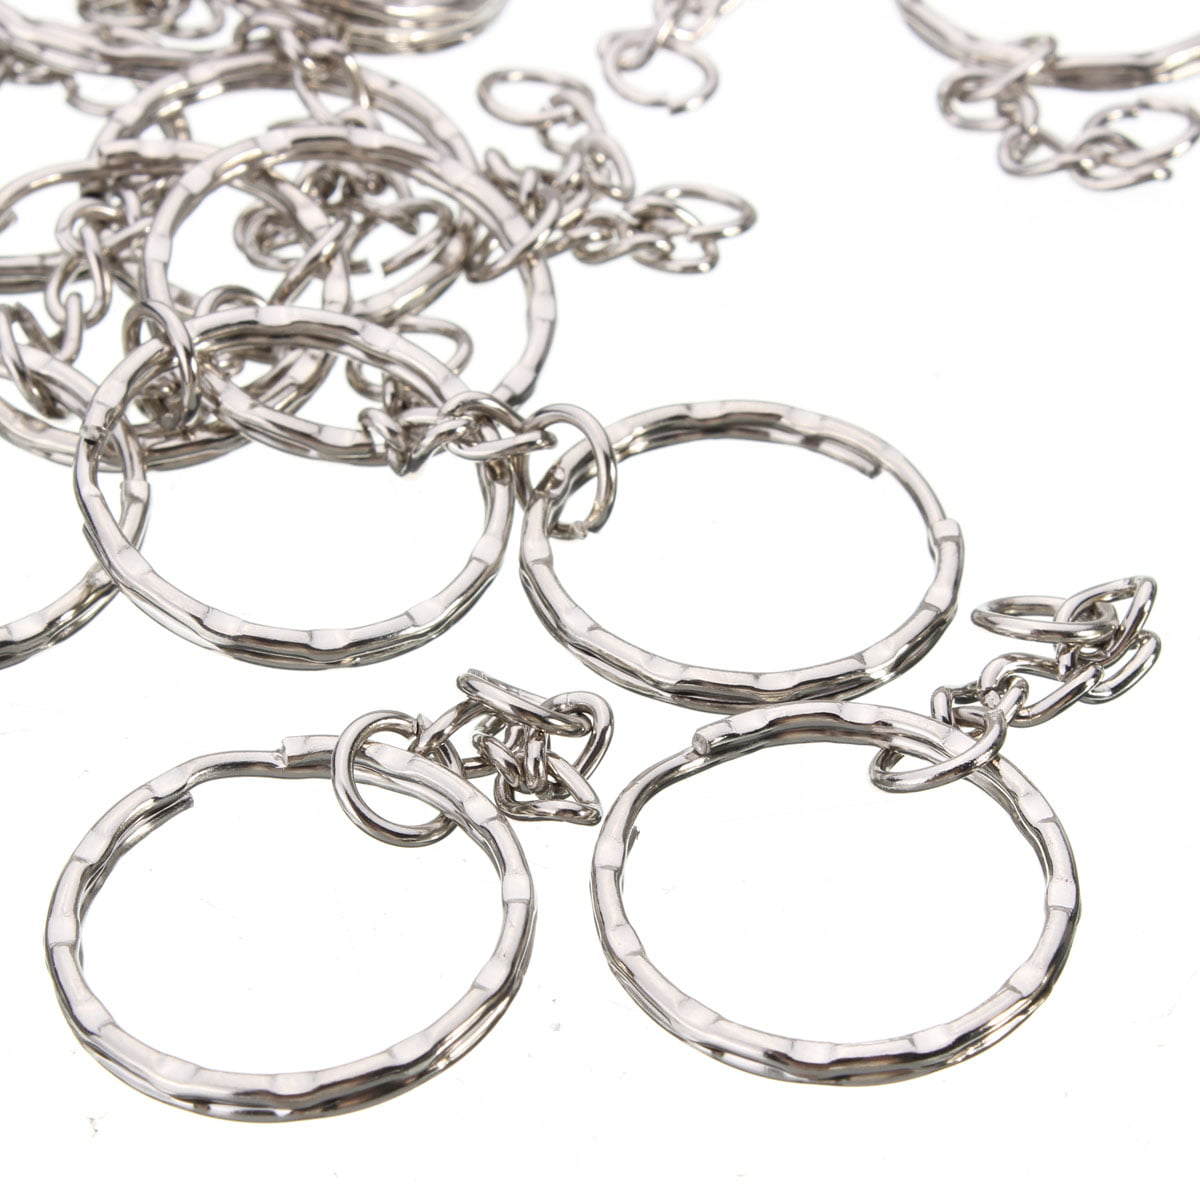 KEYCHAINS 100 SILVER PLATED SMALL KEYRING KEY RING CHAINS CRAFT CHAIN 25mm 